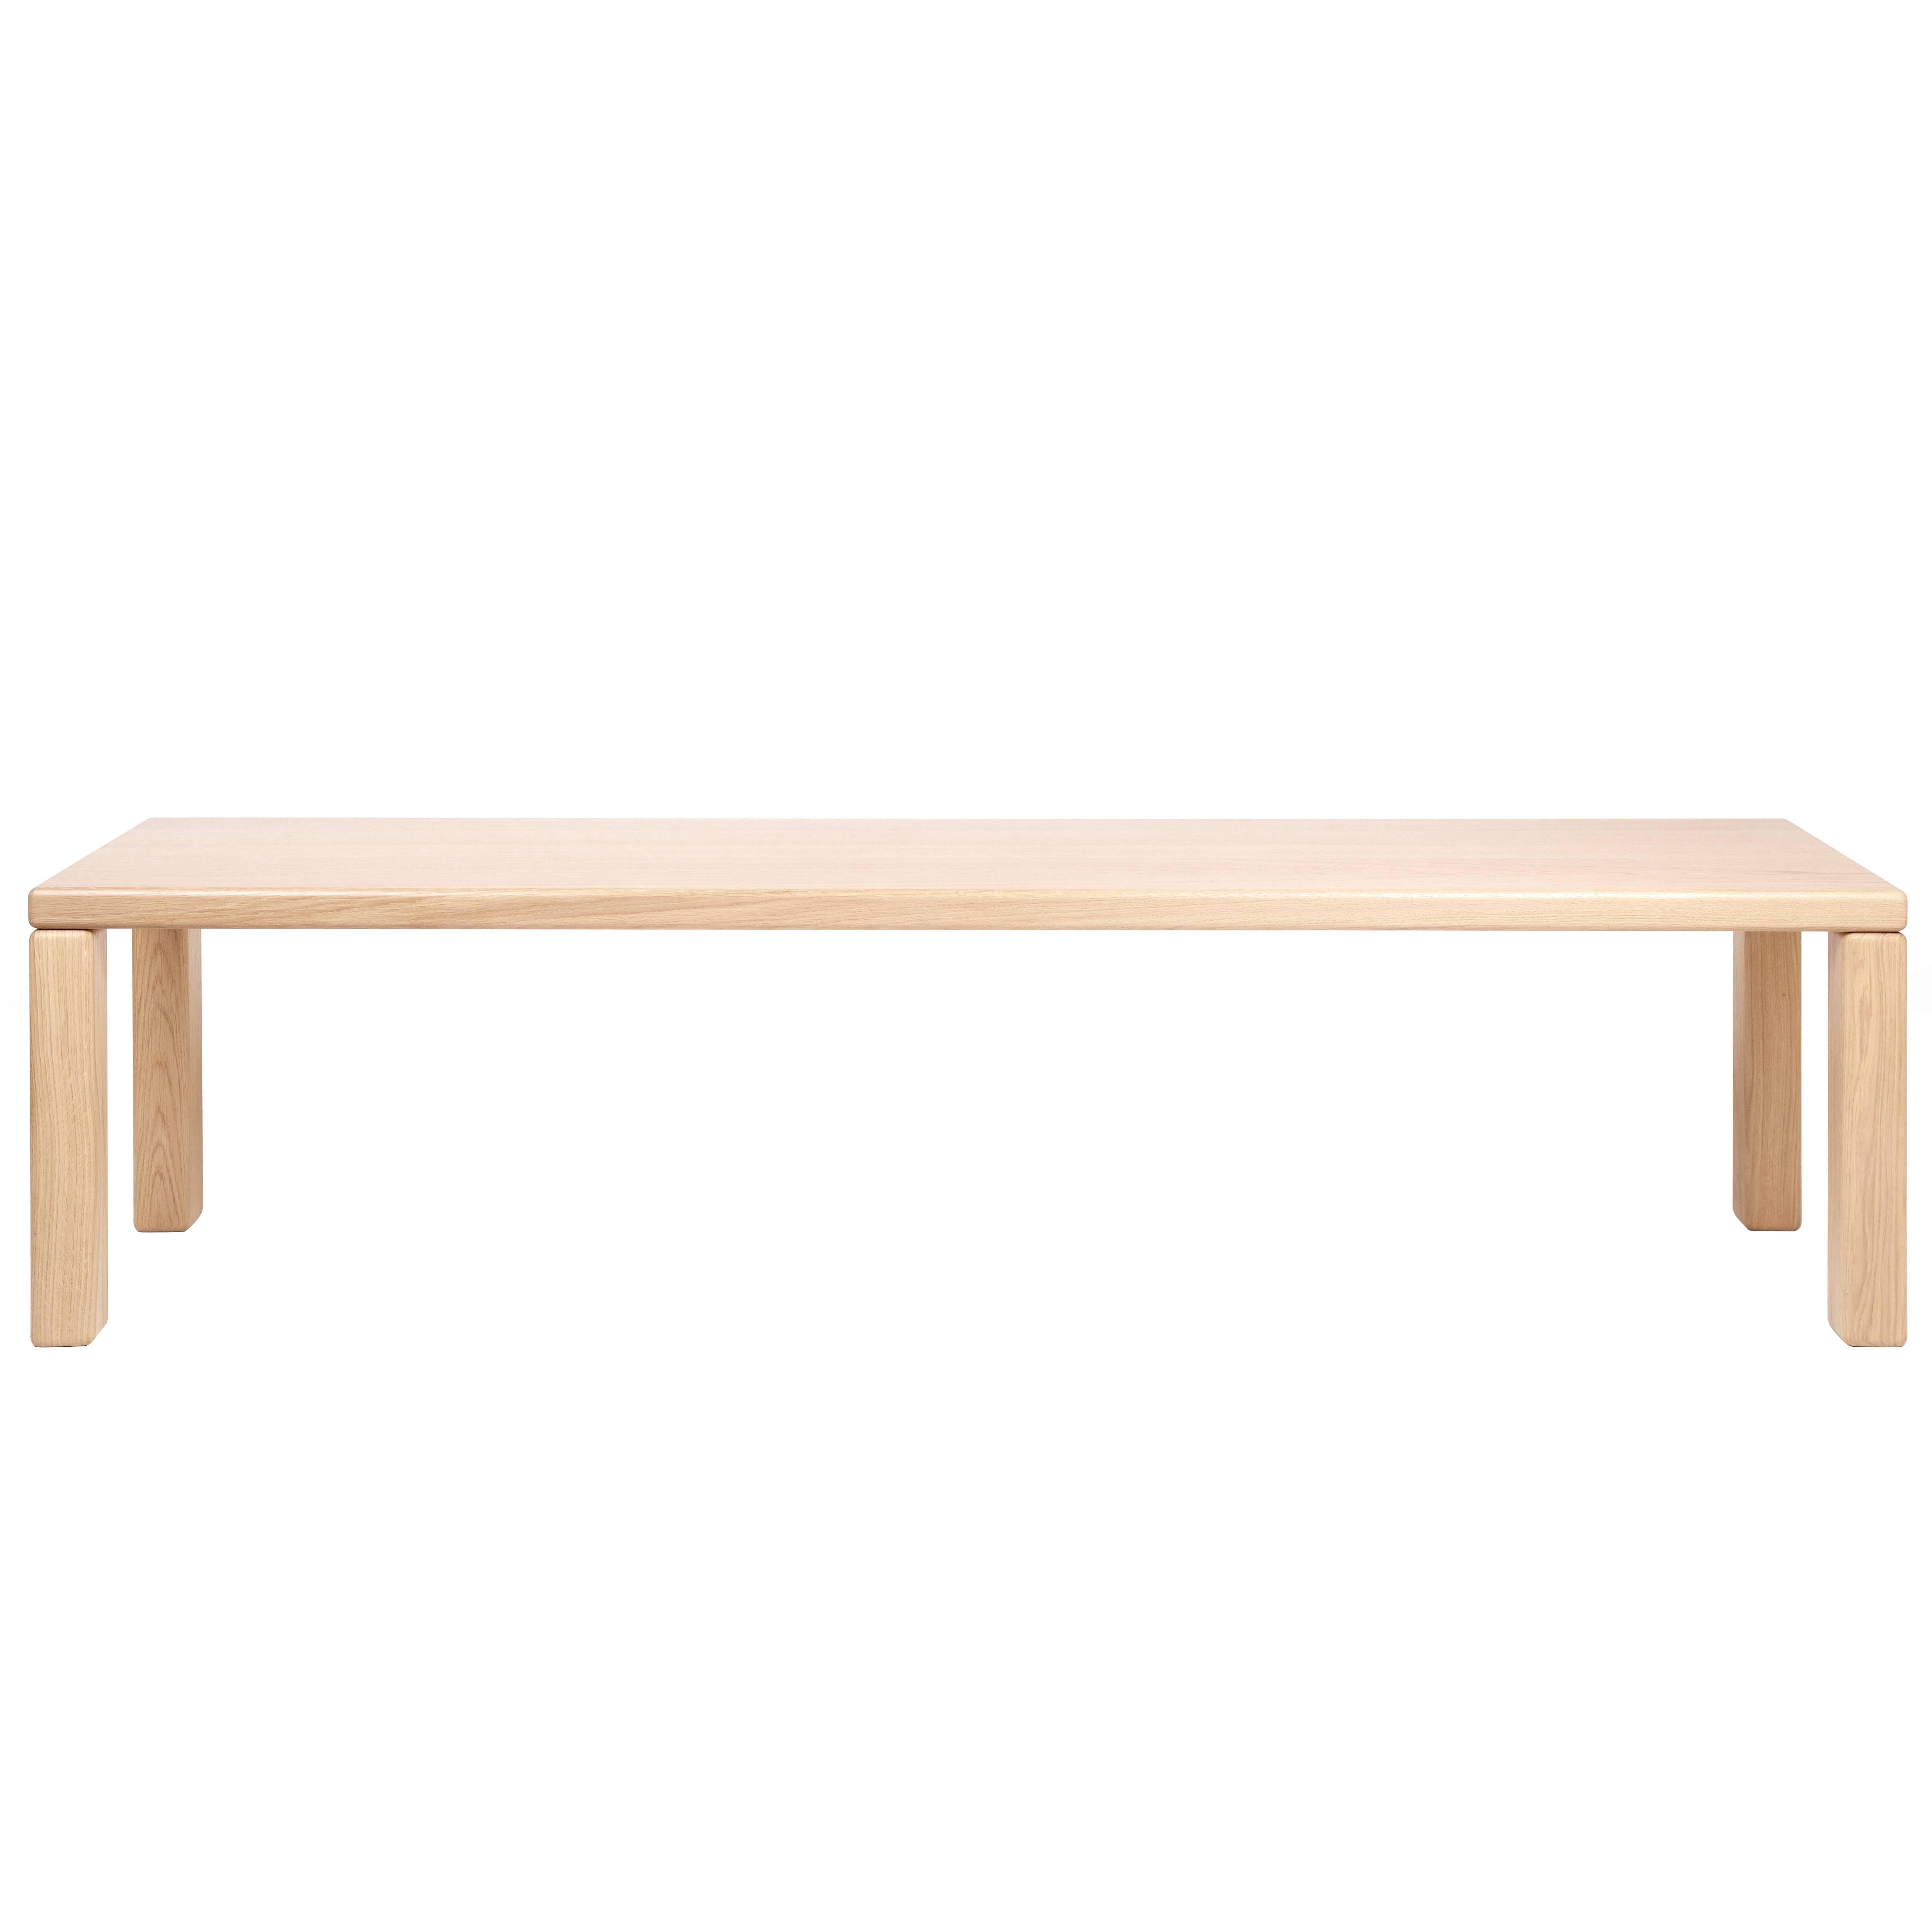 Natural Oakwood Element Bench by Terrence Woodgate for Objekten, Belgium For Sale